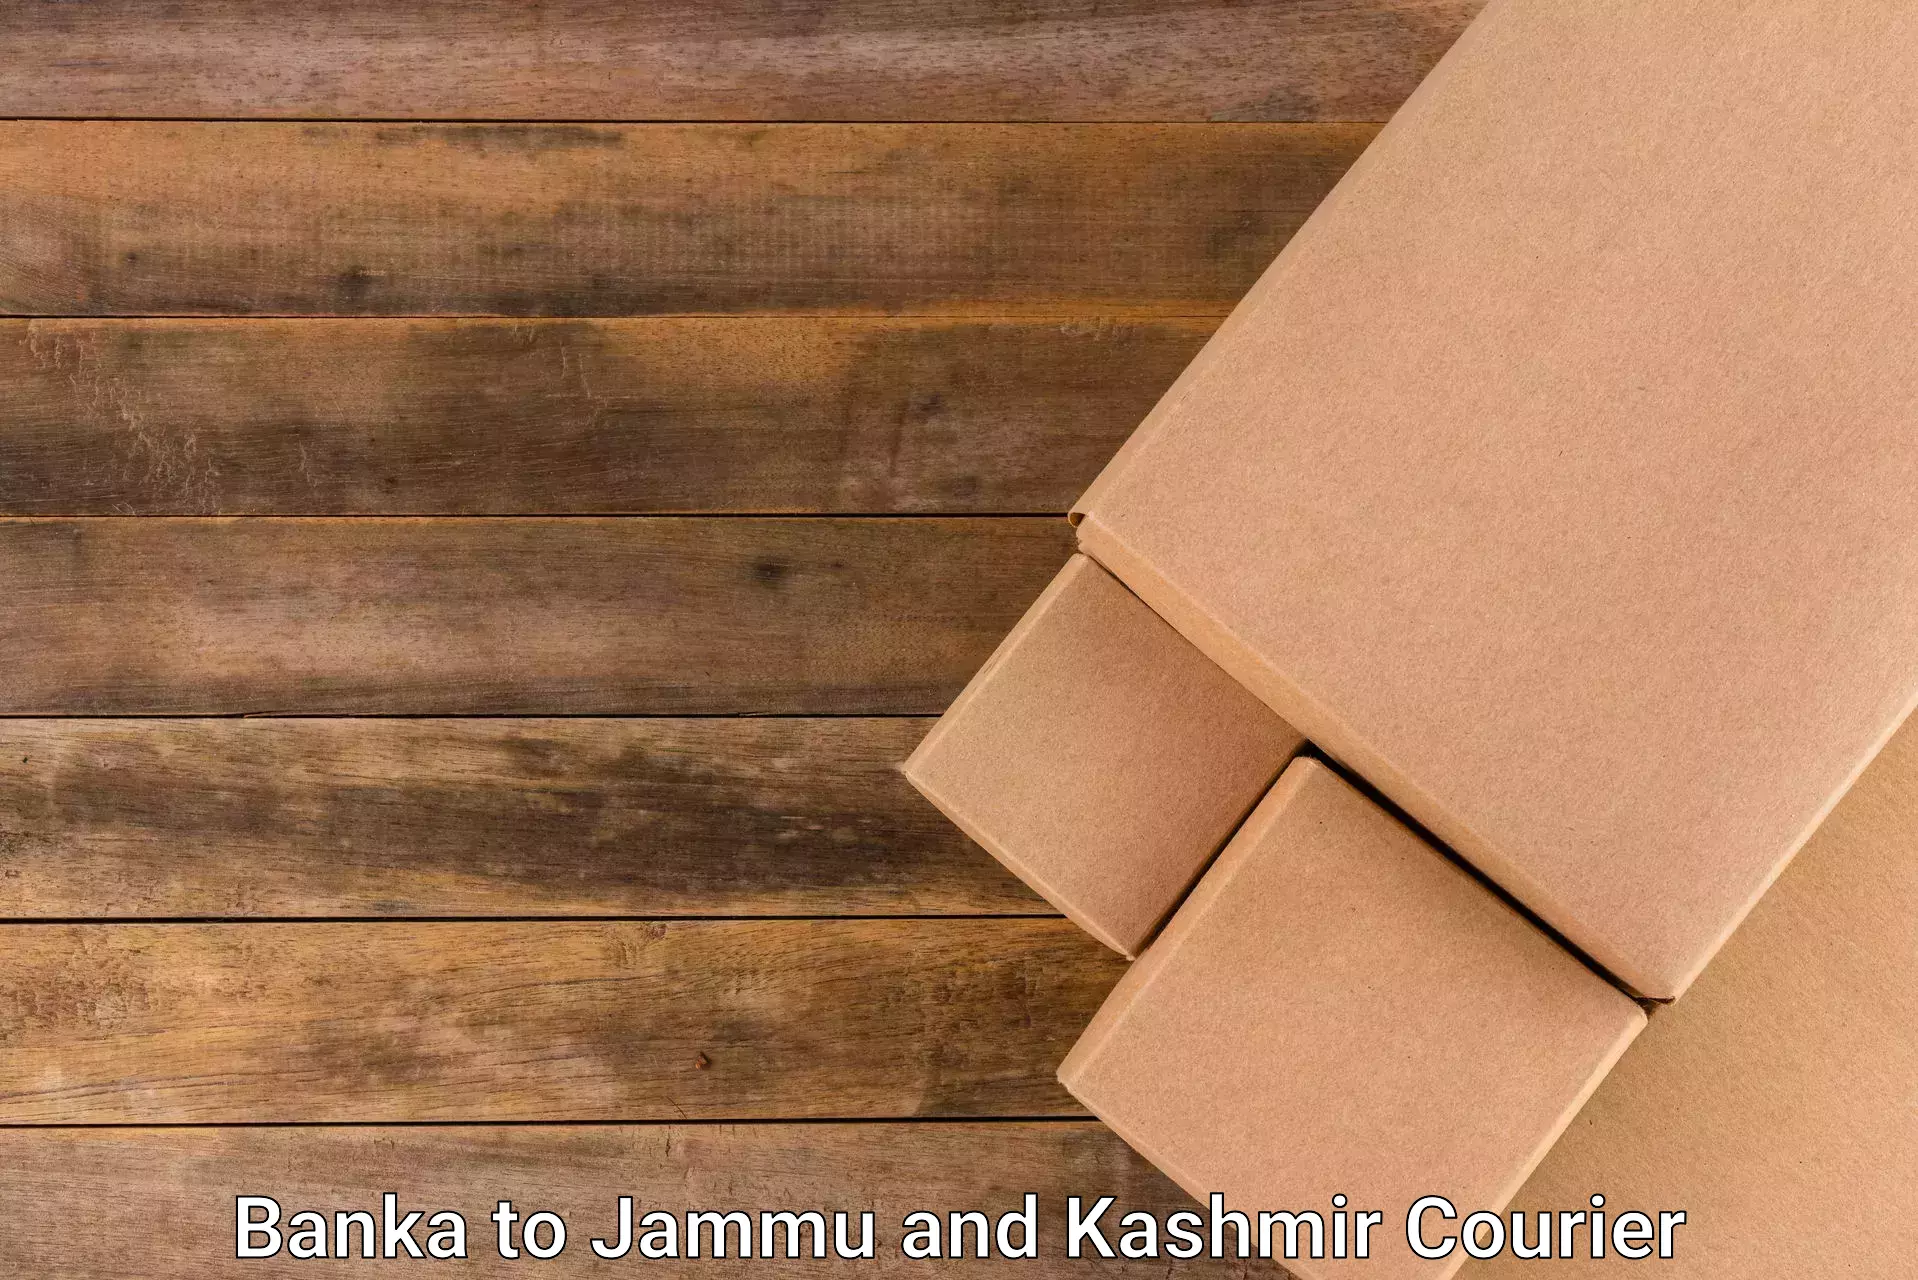 Next-generation courier services Banka to University of Jammu